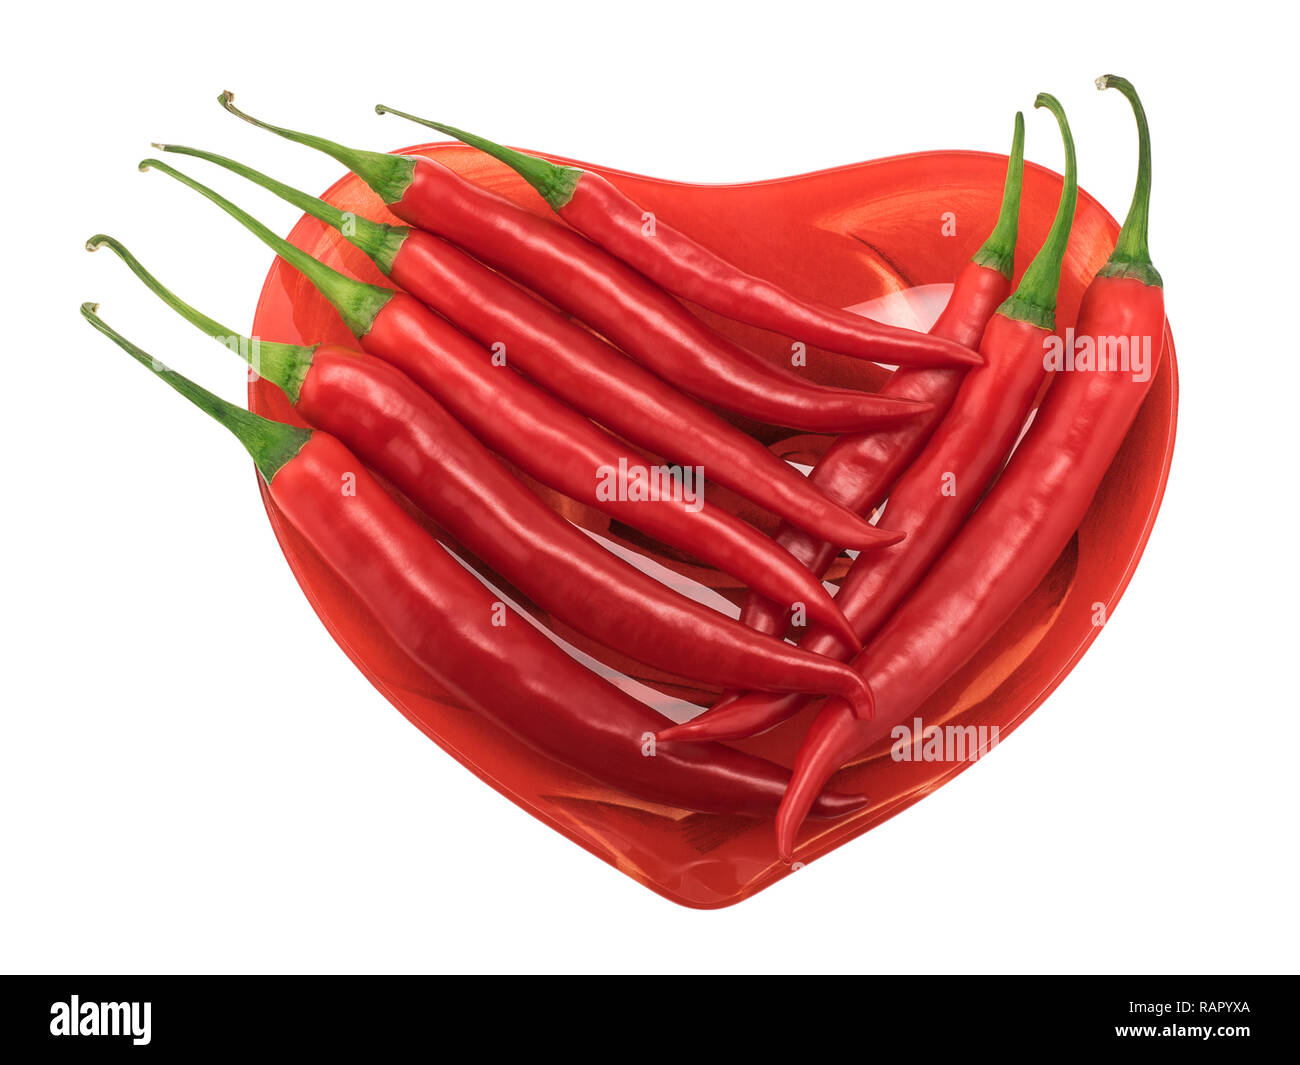 Chilli peppers on a heart-shaped plate Stock Photo